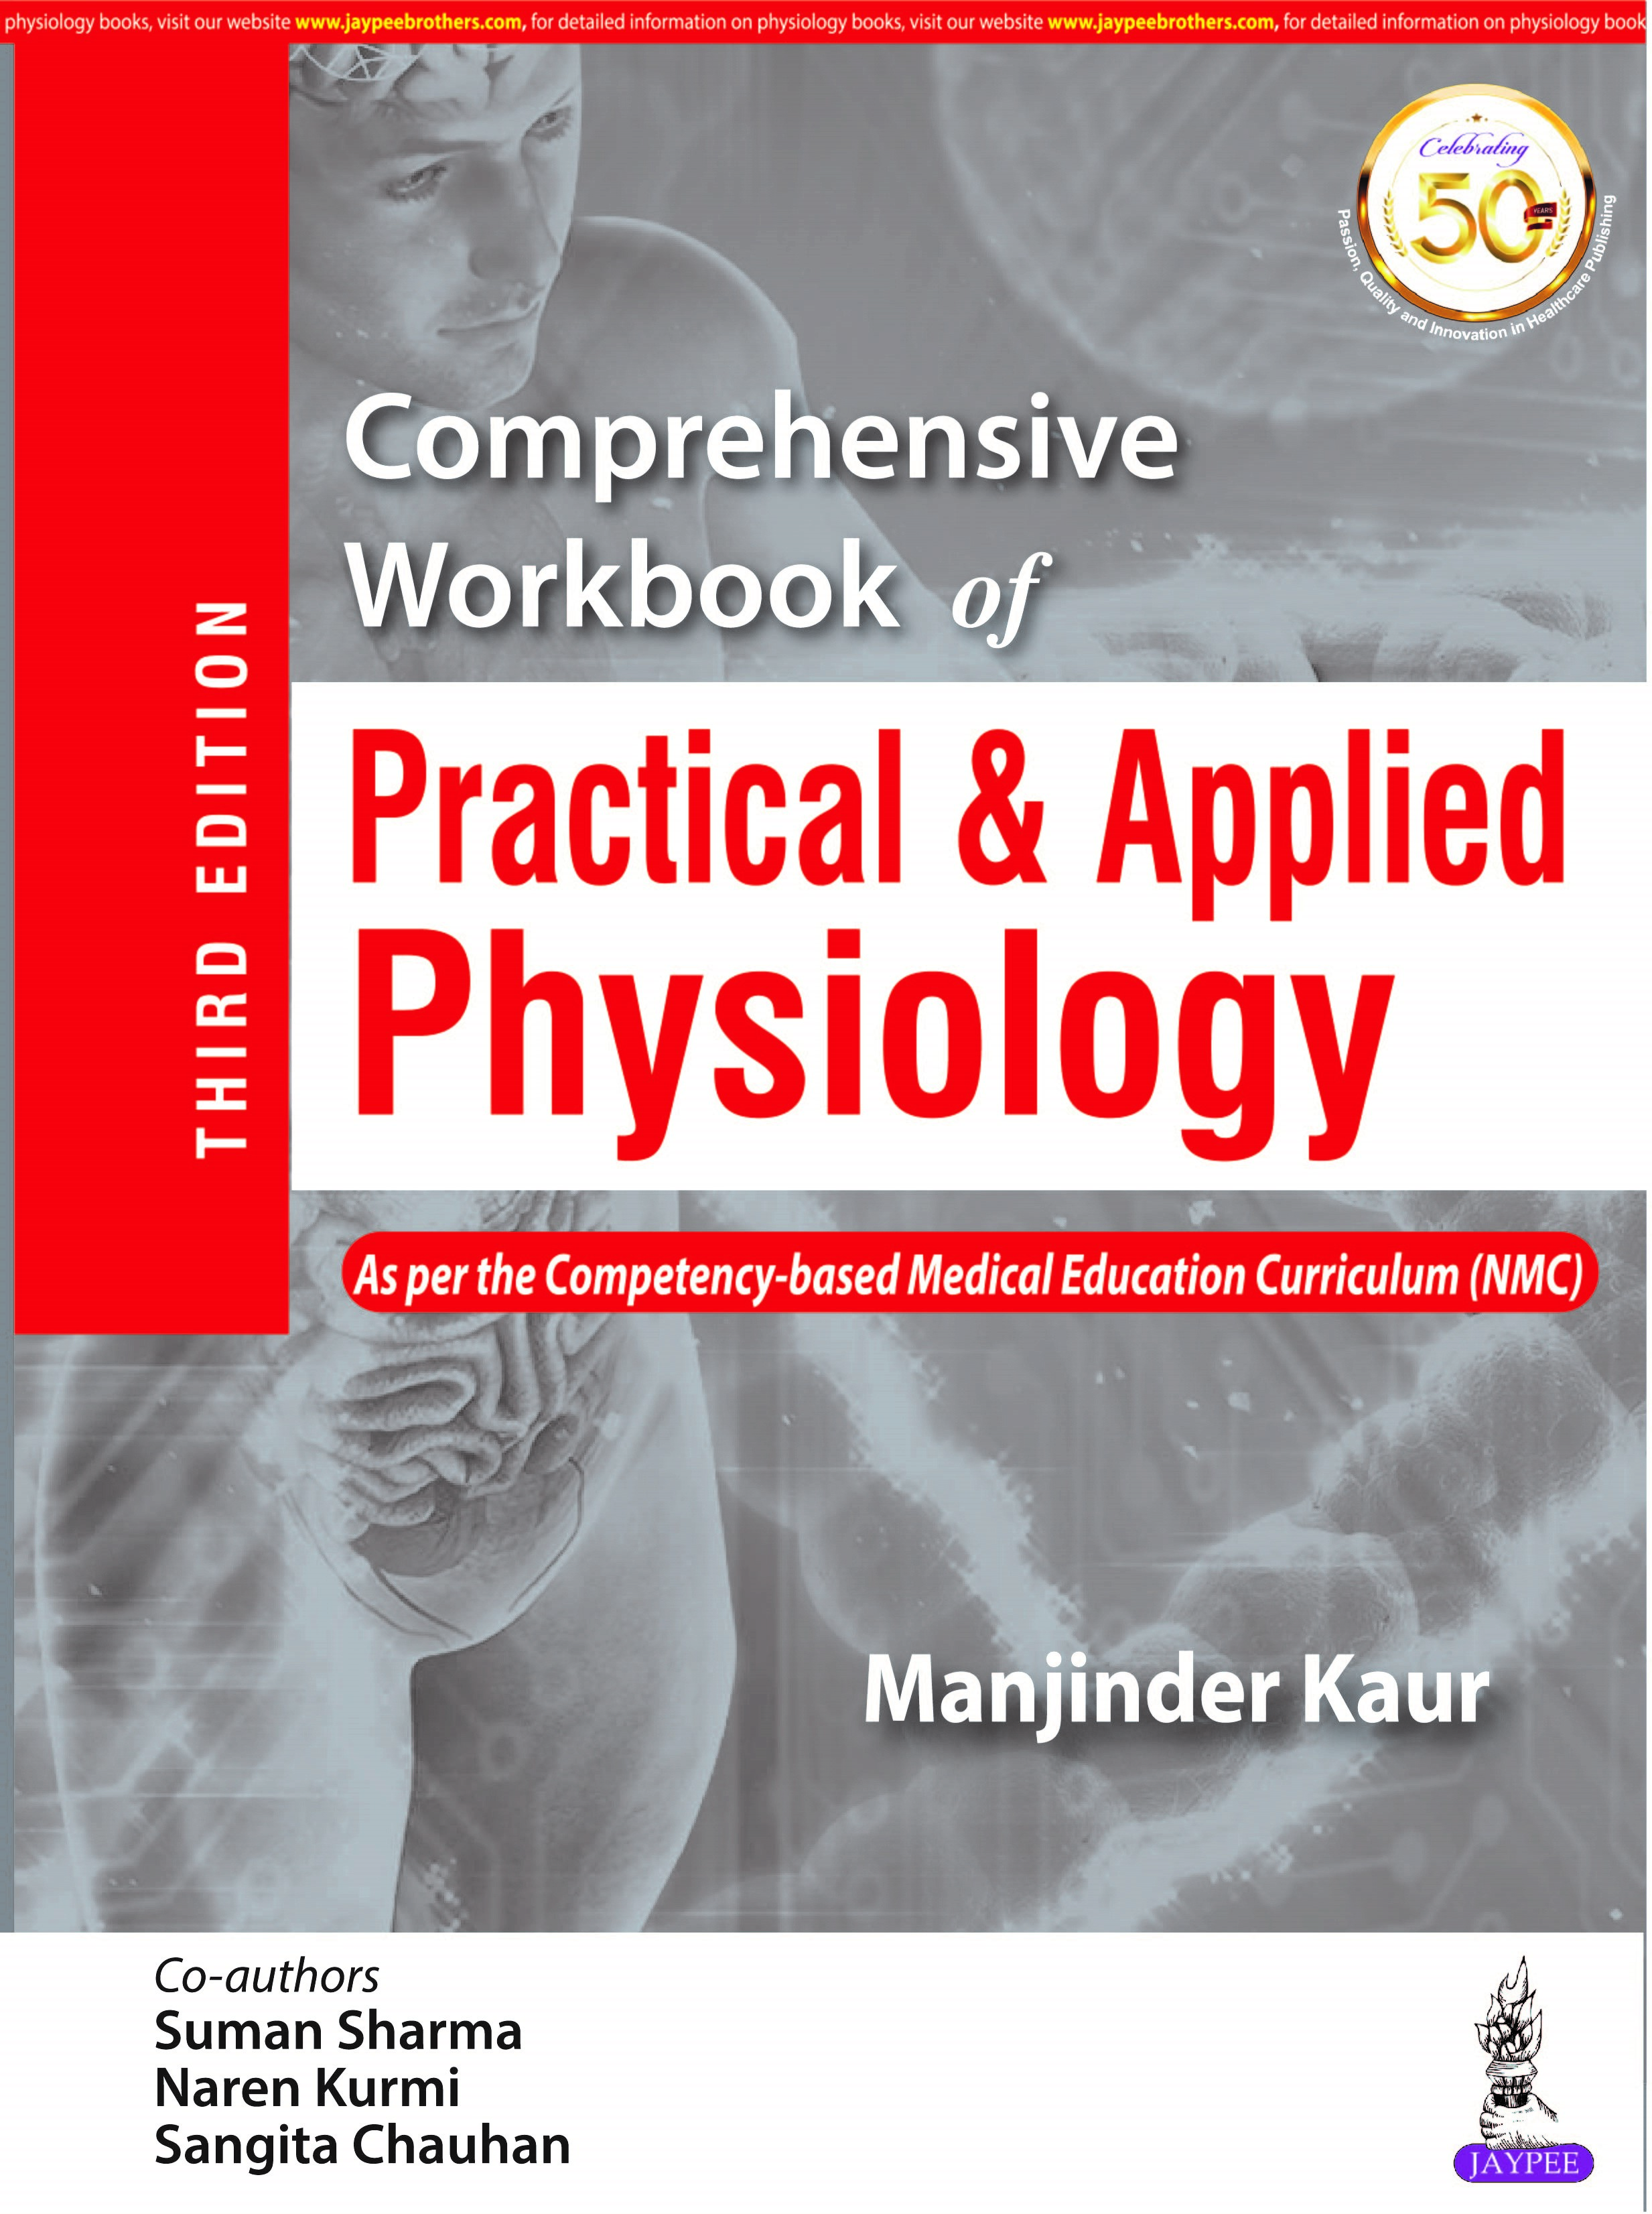 Comprehensive Workbook Of Practical & Applied Physiology